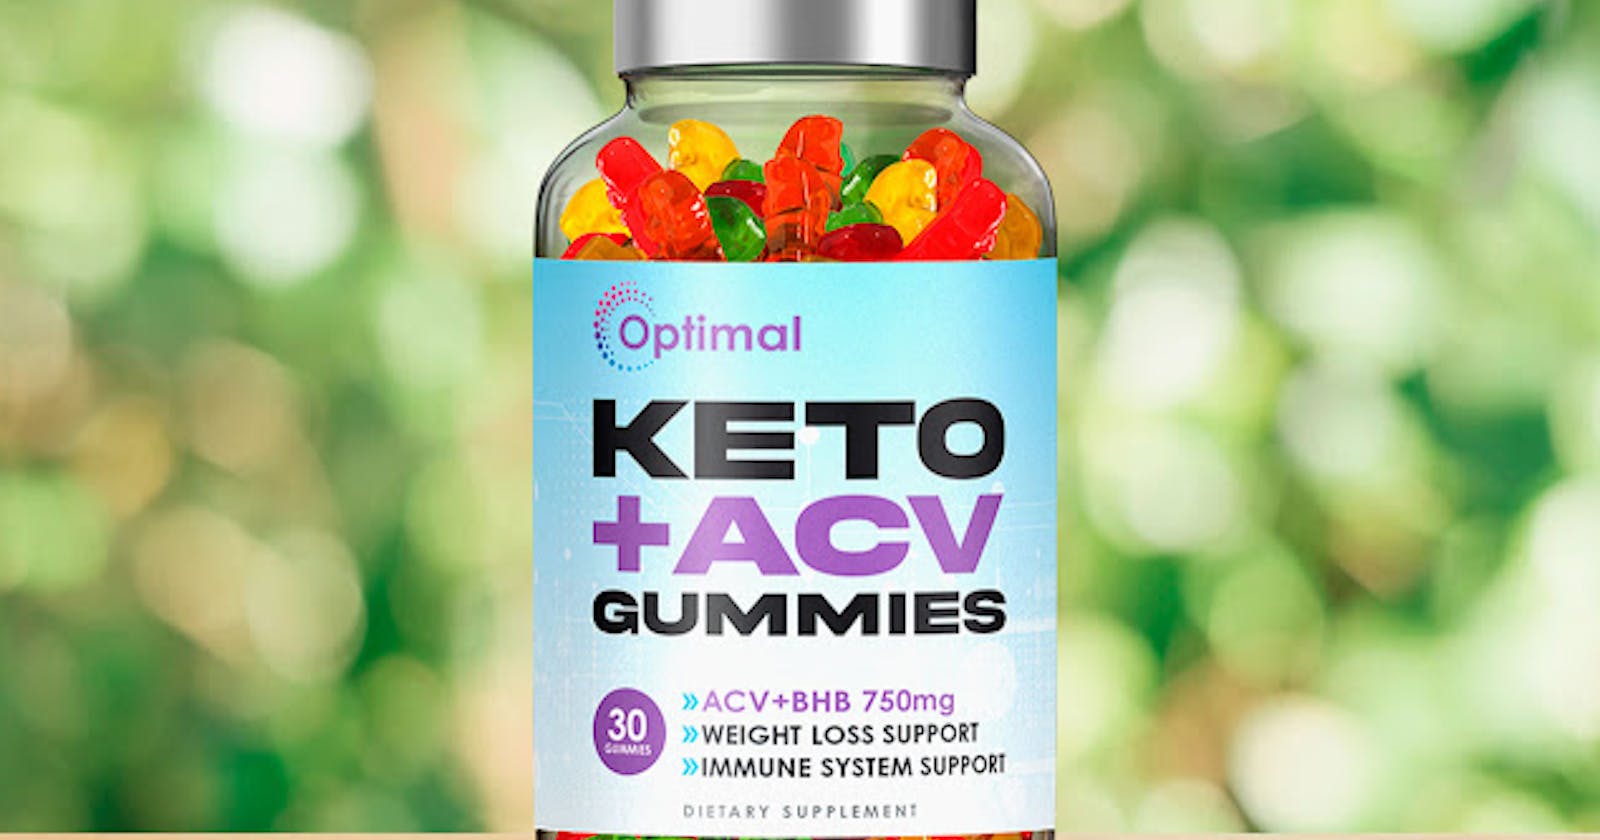 Optimal Keto ACV Gummies Review – Unique Weight Loss Formula, Ingredients, Benefits, User Reviews!